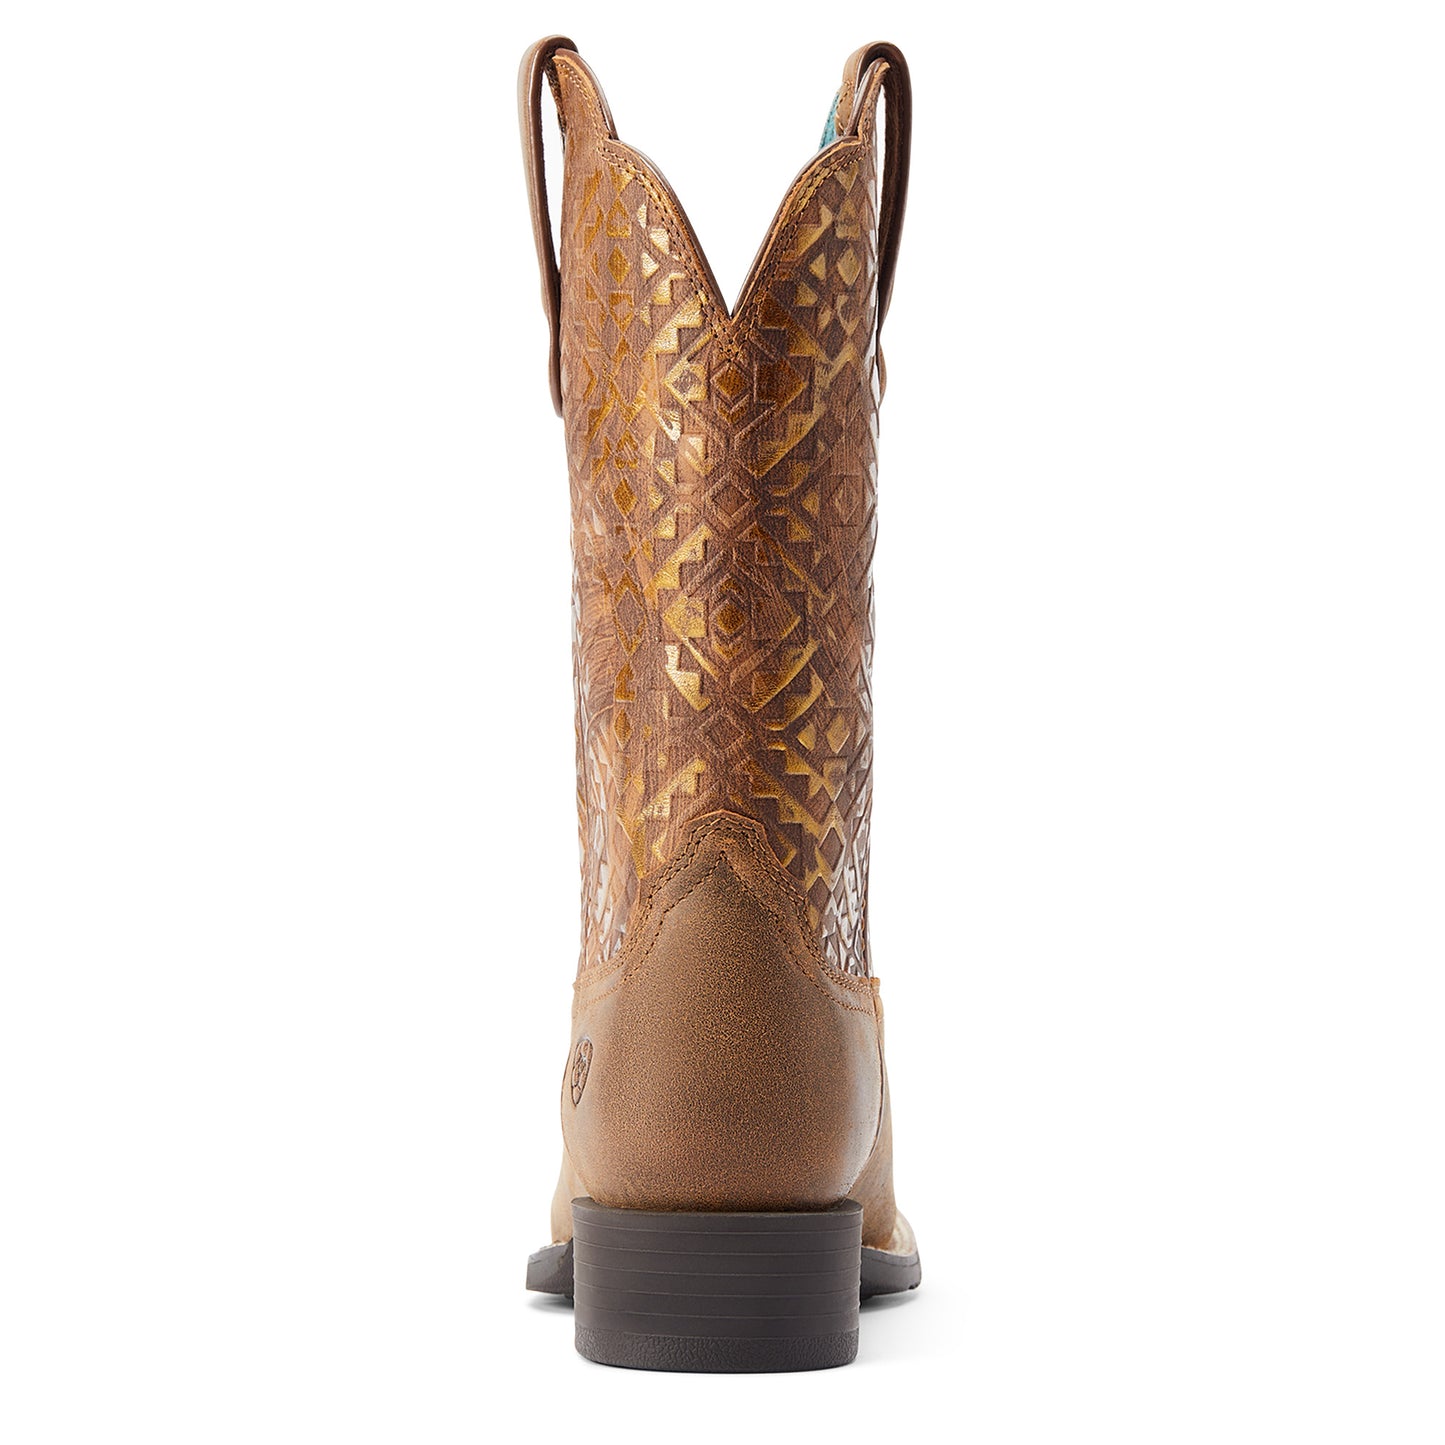 Ariat® Ladies Round Up Brown & Copper Emboss Western Boots 10044431